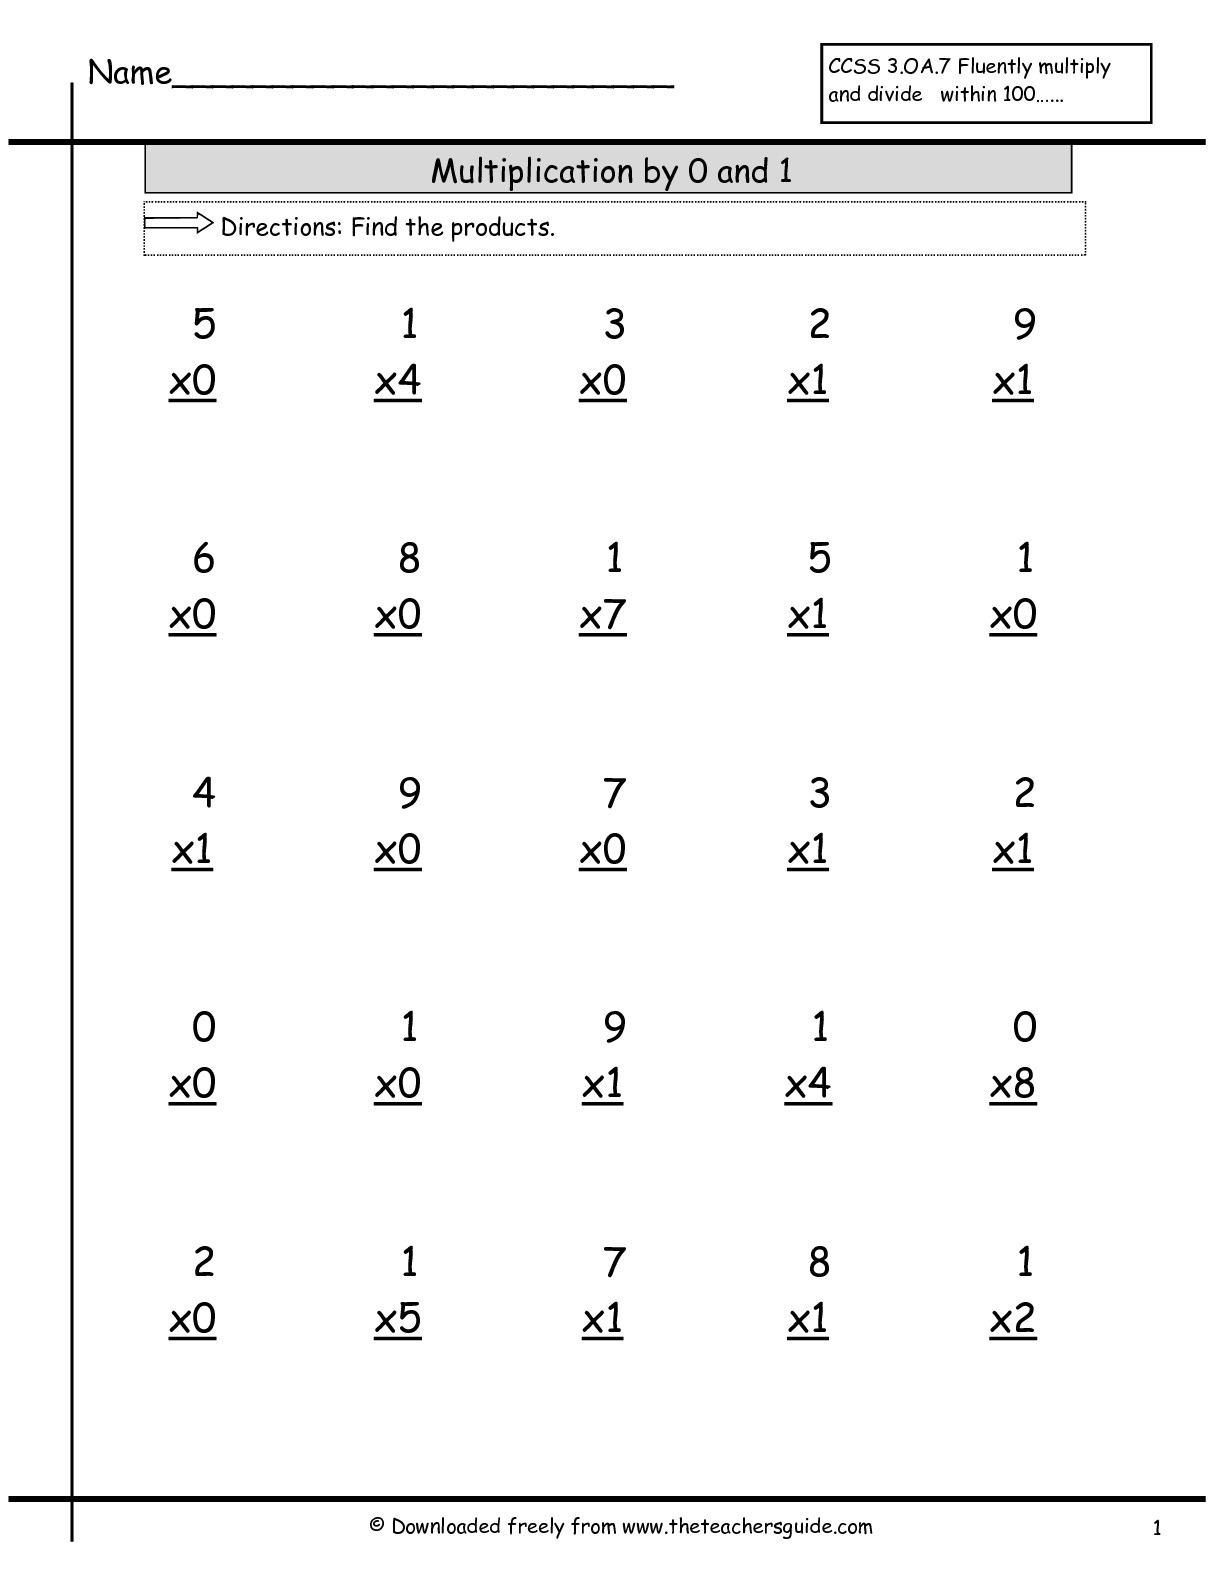 Multiplication Facts Worksheets From The Teacher&amp;#039;s Guide throughout Multiplication X10 Worksheets